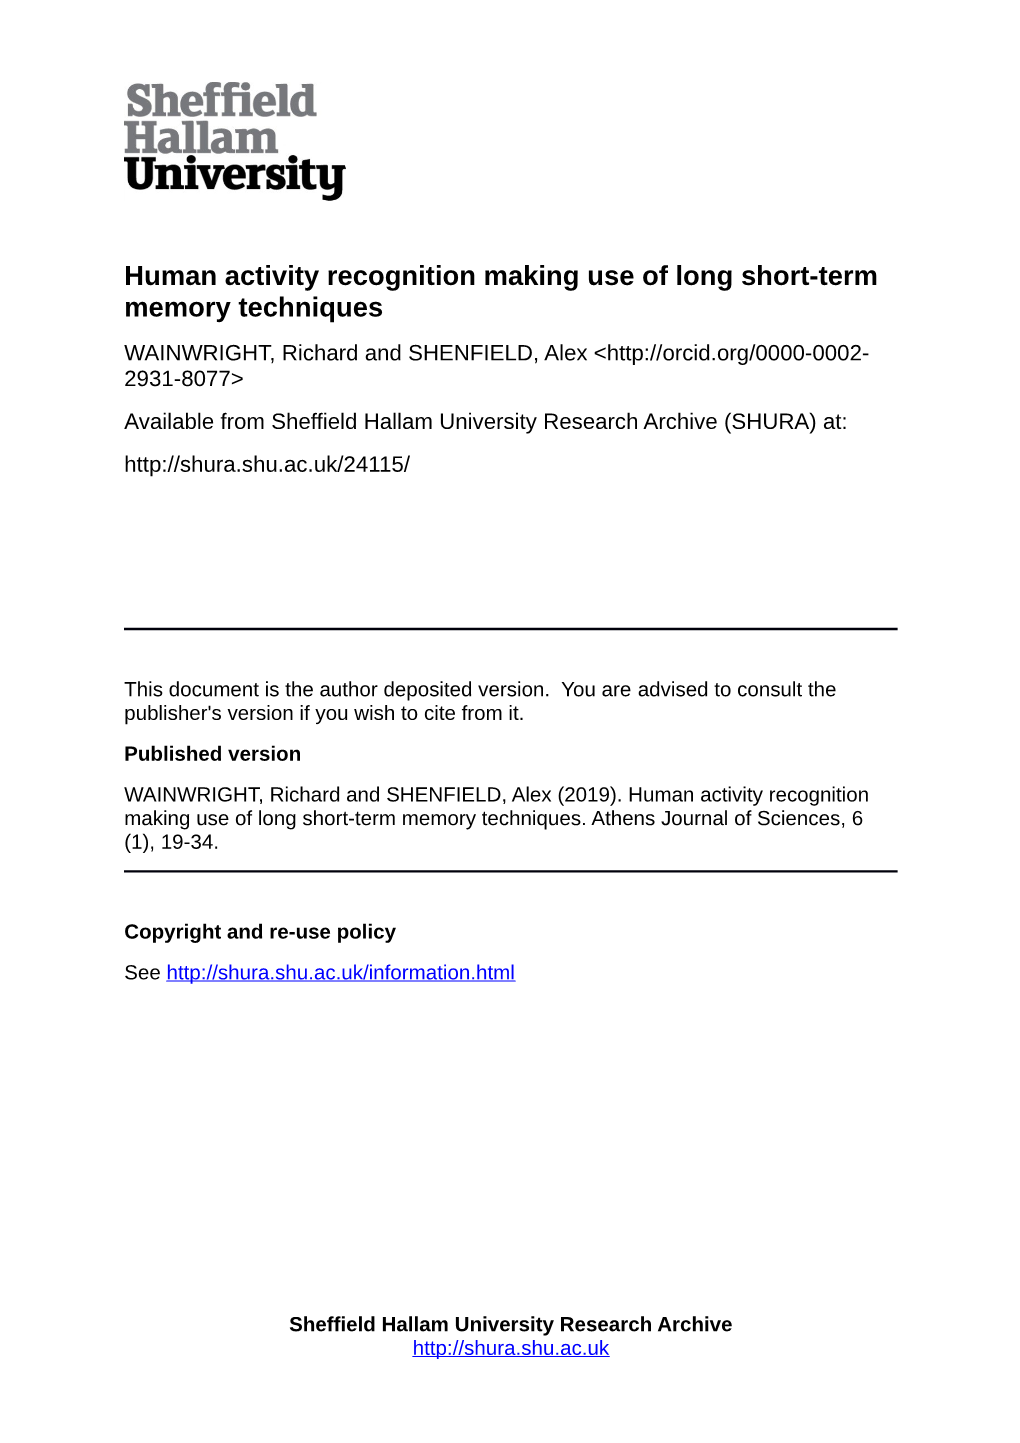 Human Activity Recognition Making Use of Long Short-Term Memory